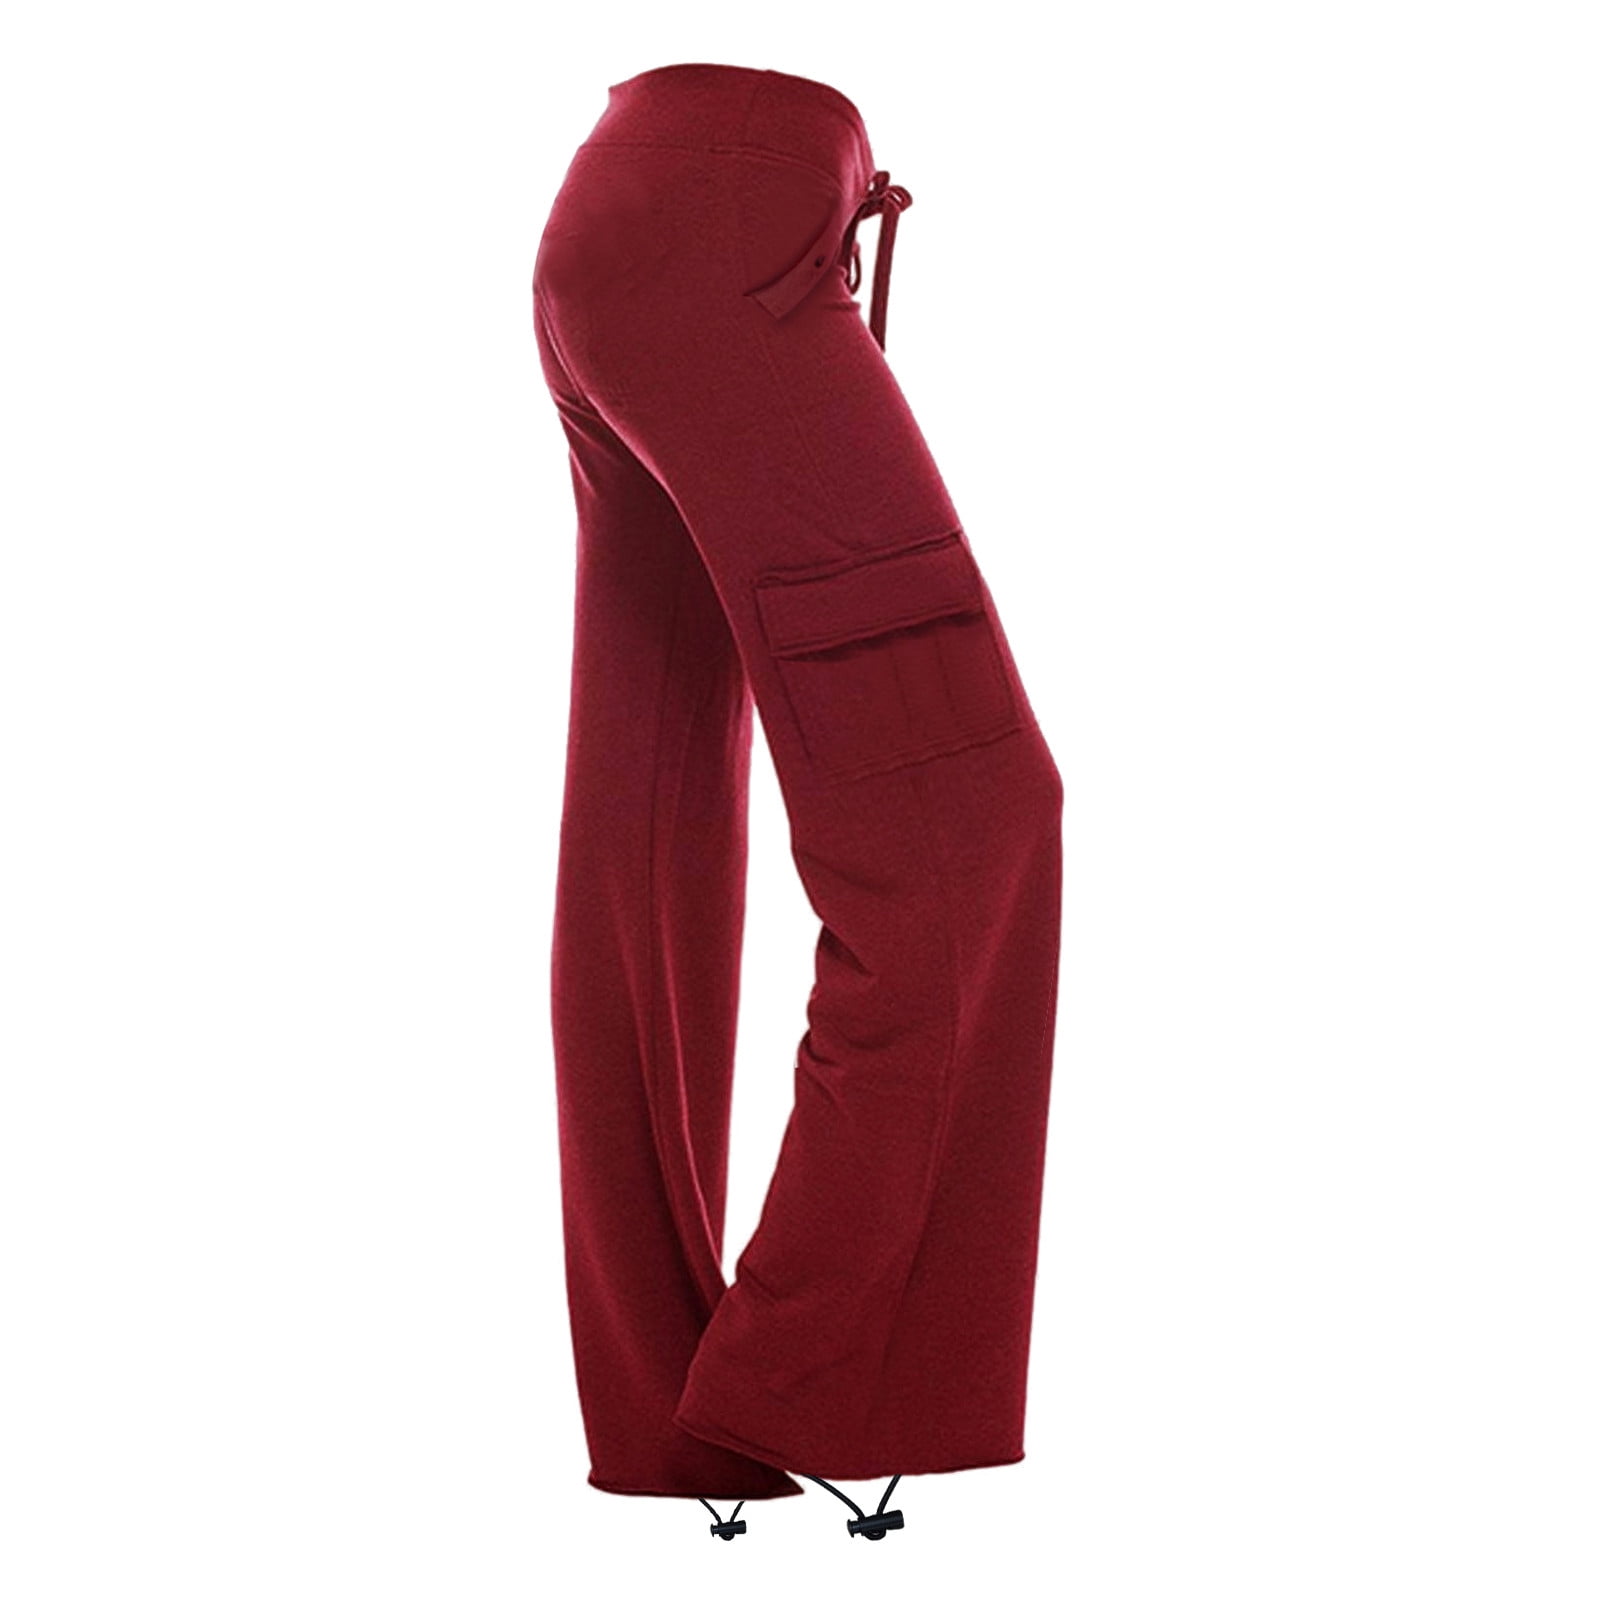 Ersazi Baggy Sweatpants For Women Women'S Fashion High Waist Straight  Pocket Pants Solid Color Casual Loose Sweatpants Yoga Pants On Clearance  Red Plus Size Cargo Pants S 